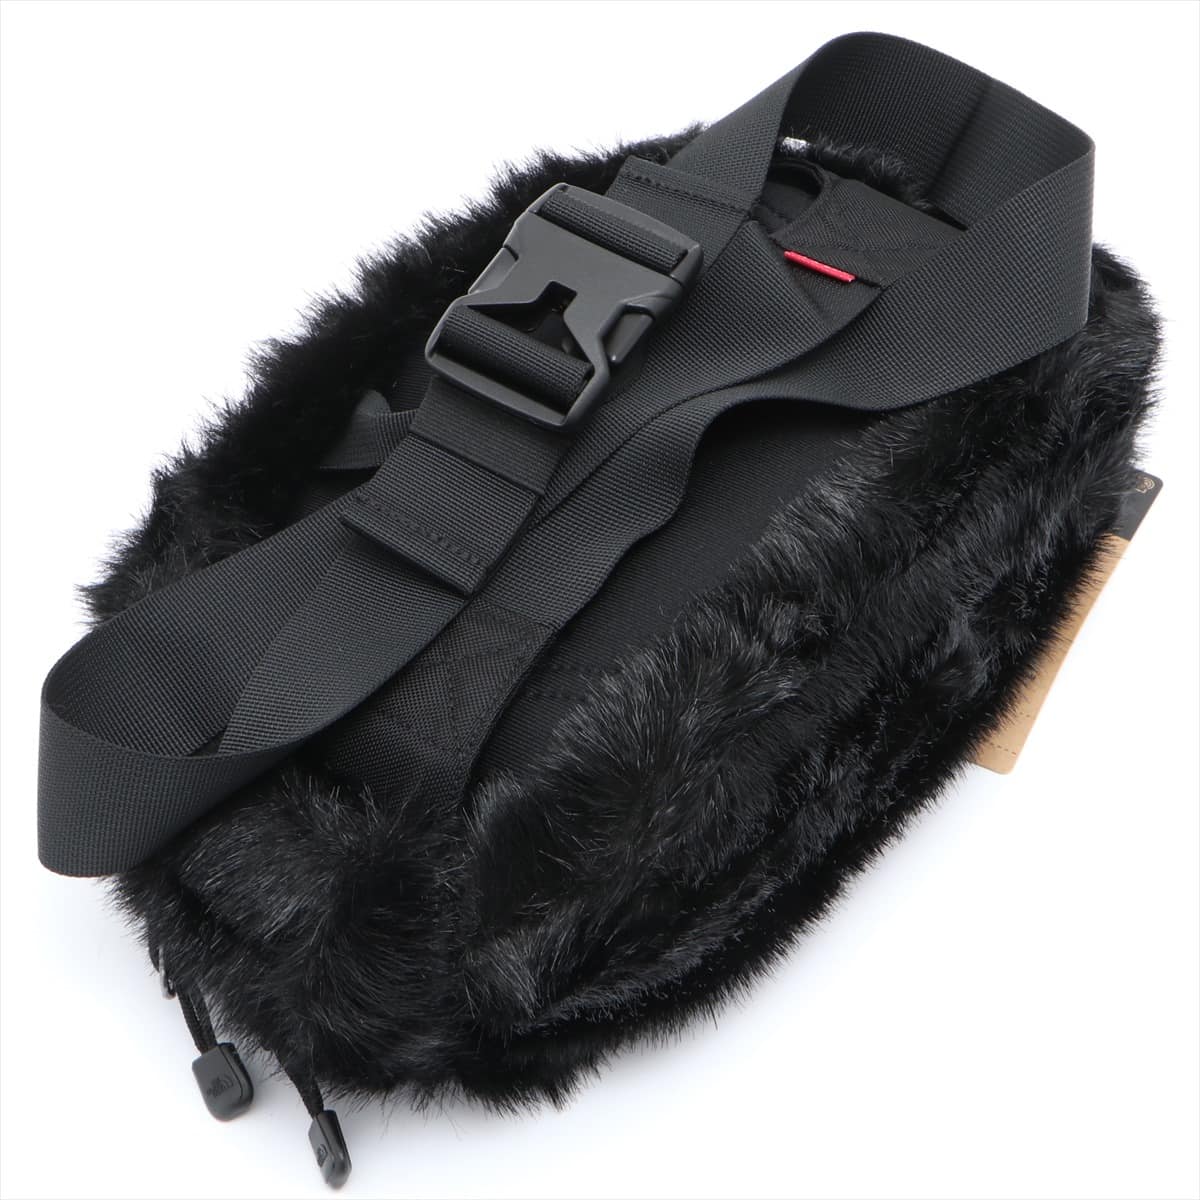 SUPREME × THE NORTH FACE Fur Sling backpack Black 2020AW There is a slight perfume smell